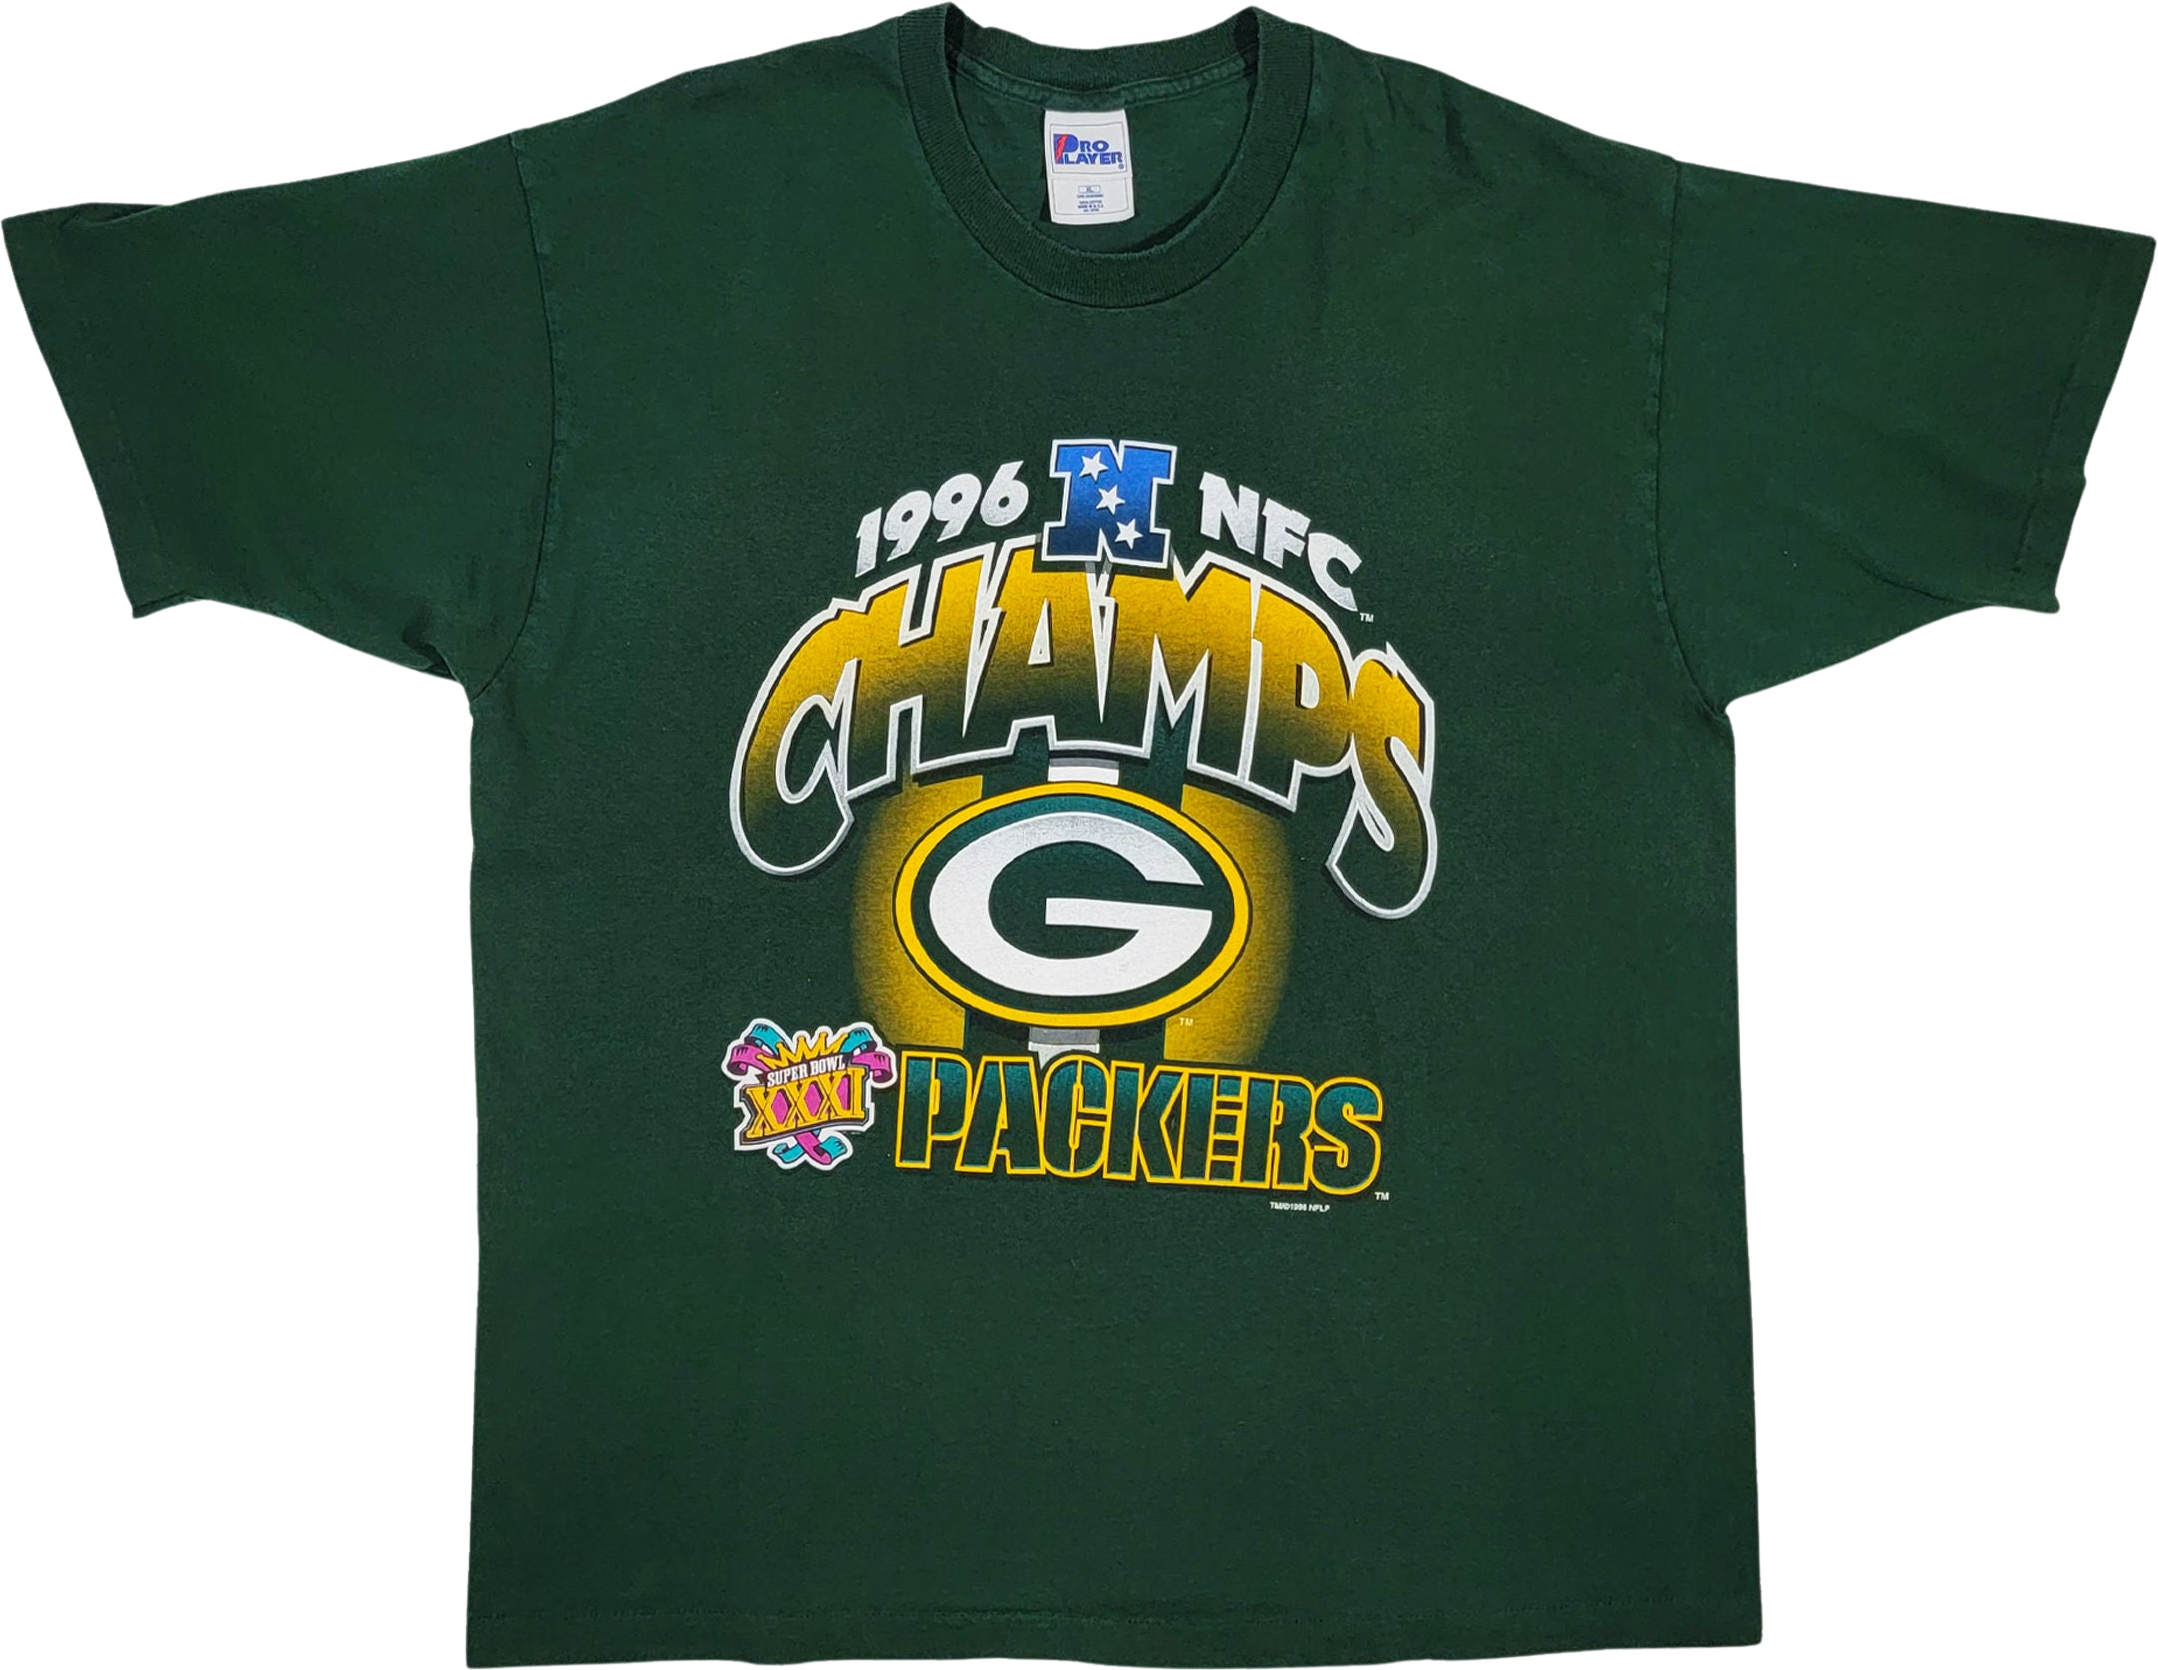 90s NFL PACKERS Tシャツ タイダイ染め old vintage ic.sch.id